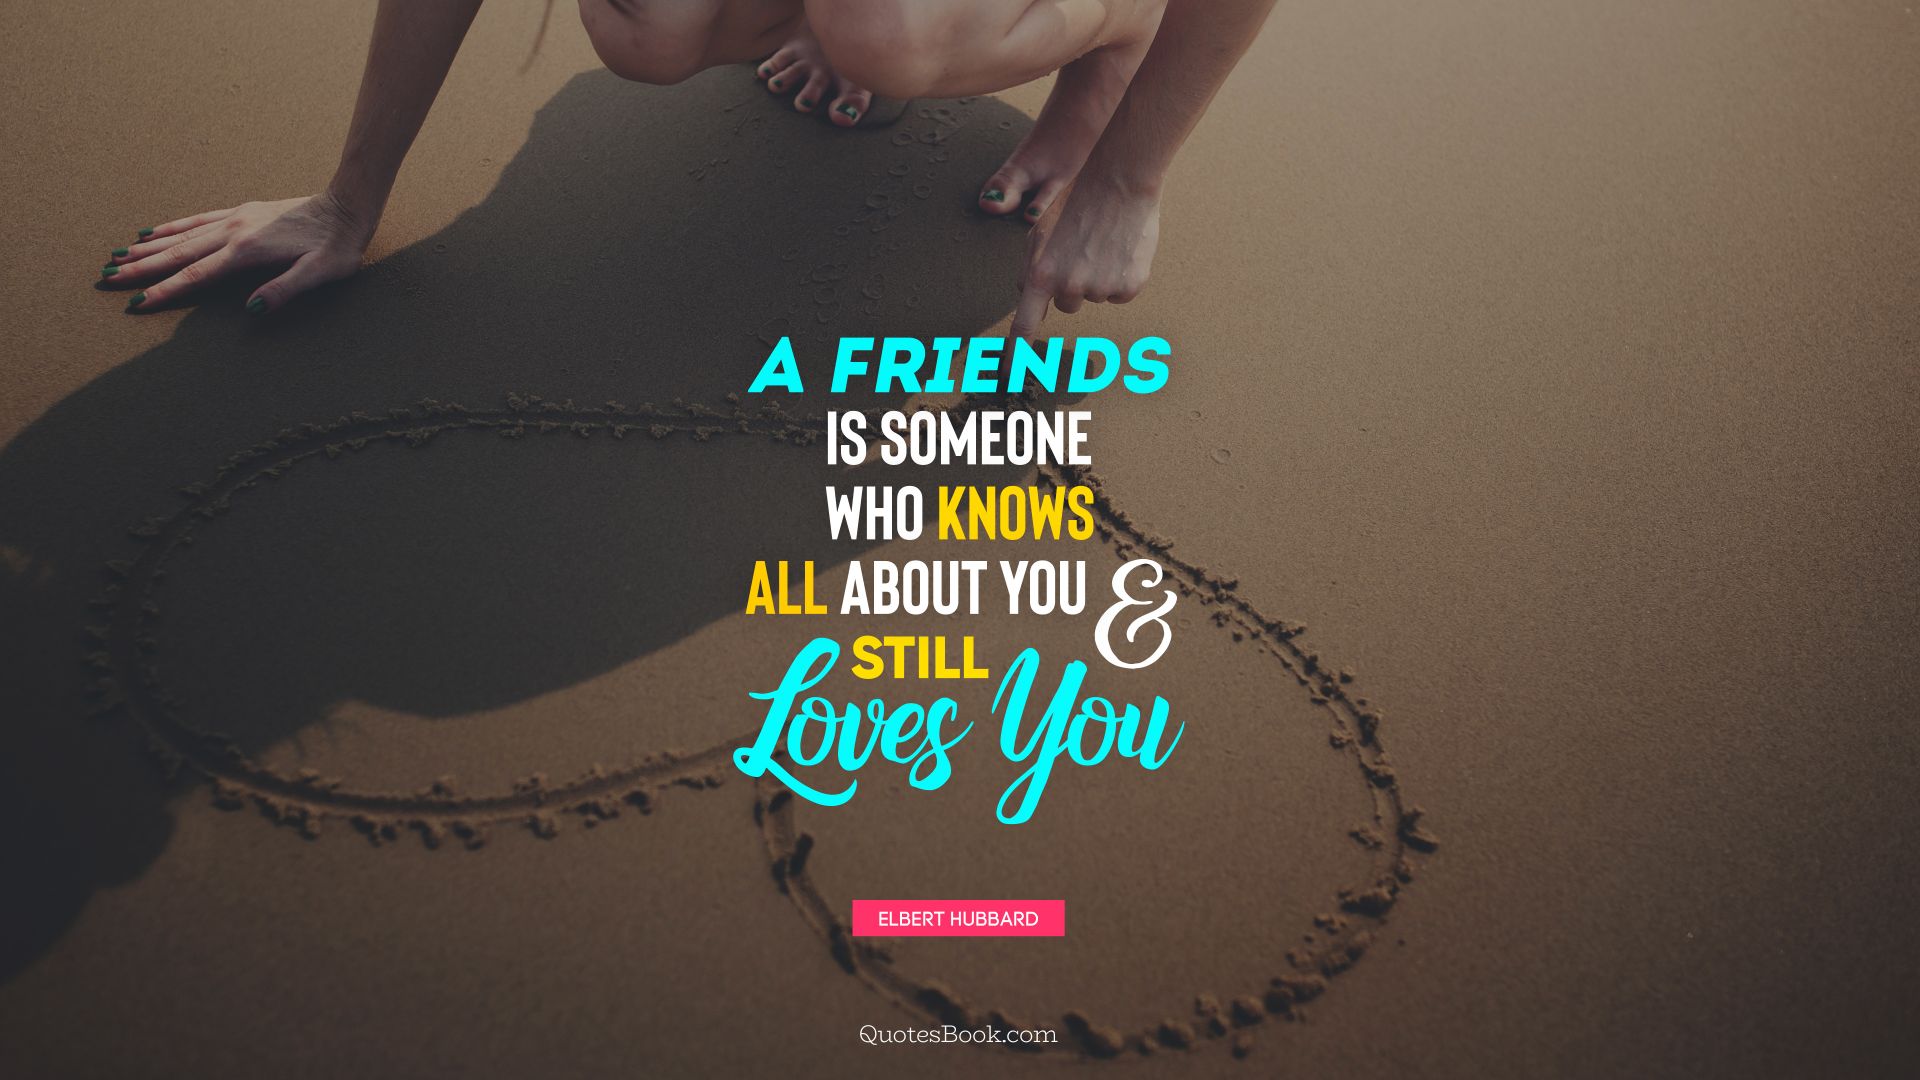 A friends is someone who knows all about you and still loves you. - Quote by Elbert Hubbard